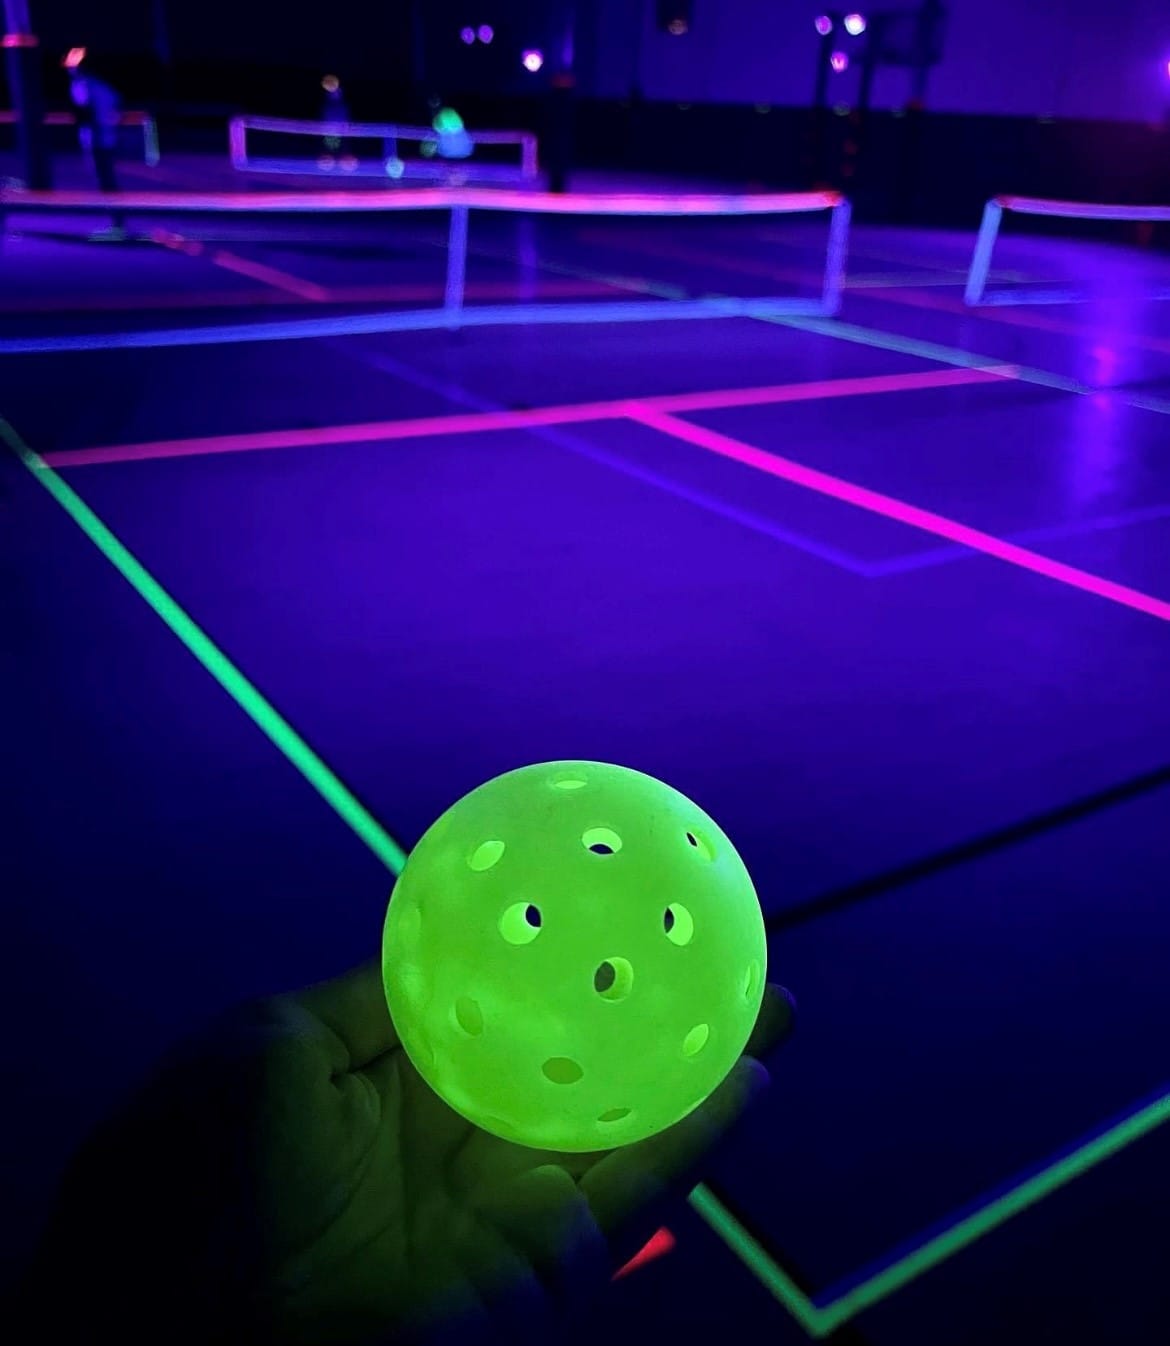 30 Teams Already Signed Up for Glow in the Dark Pickleball Tournament on Feb 3rd! Sign Up Today and Join the Fun!